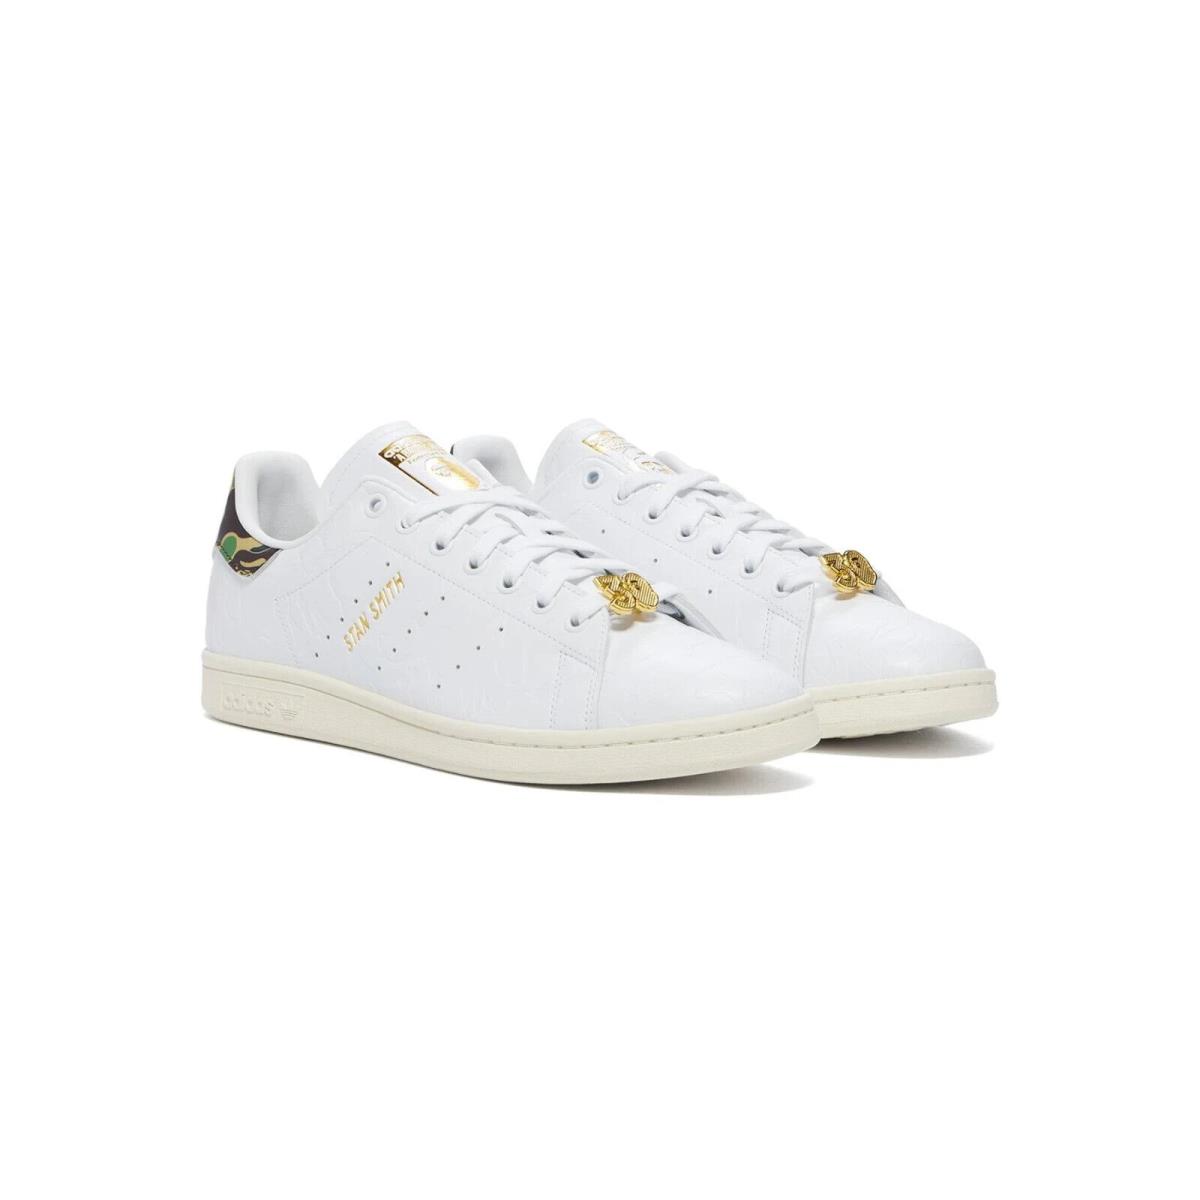 Bape x Adidas Stan Smith US Size 9.5 30th Anniversary Color White In Hand